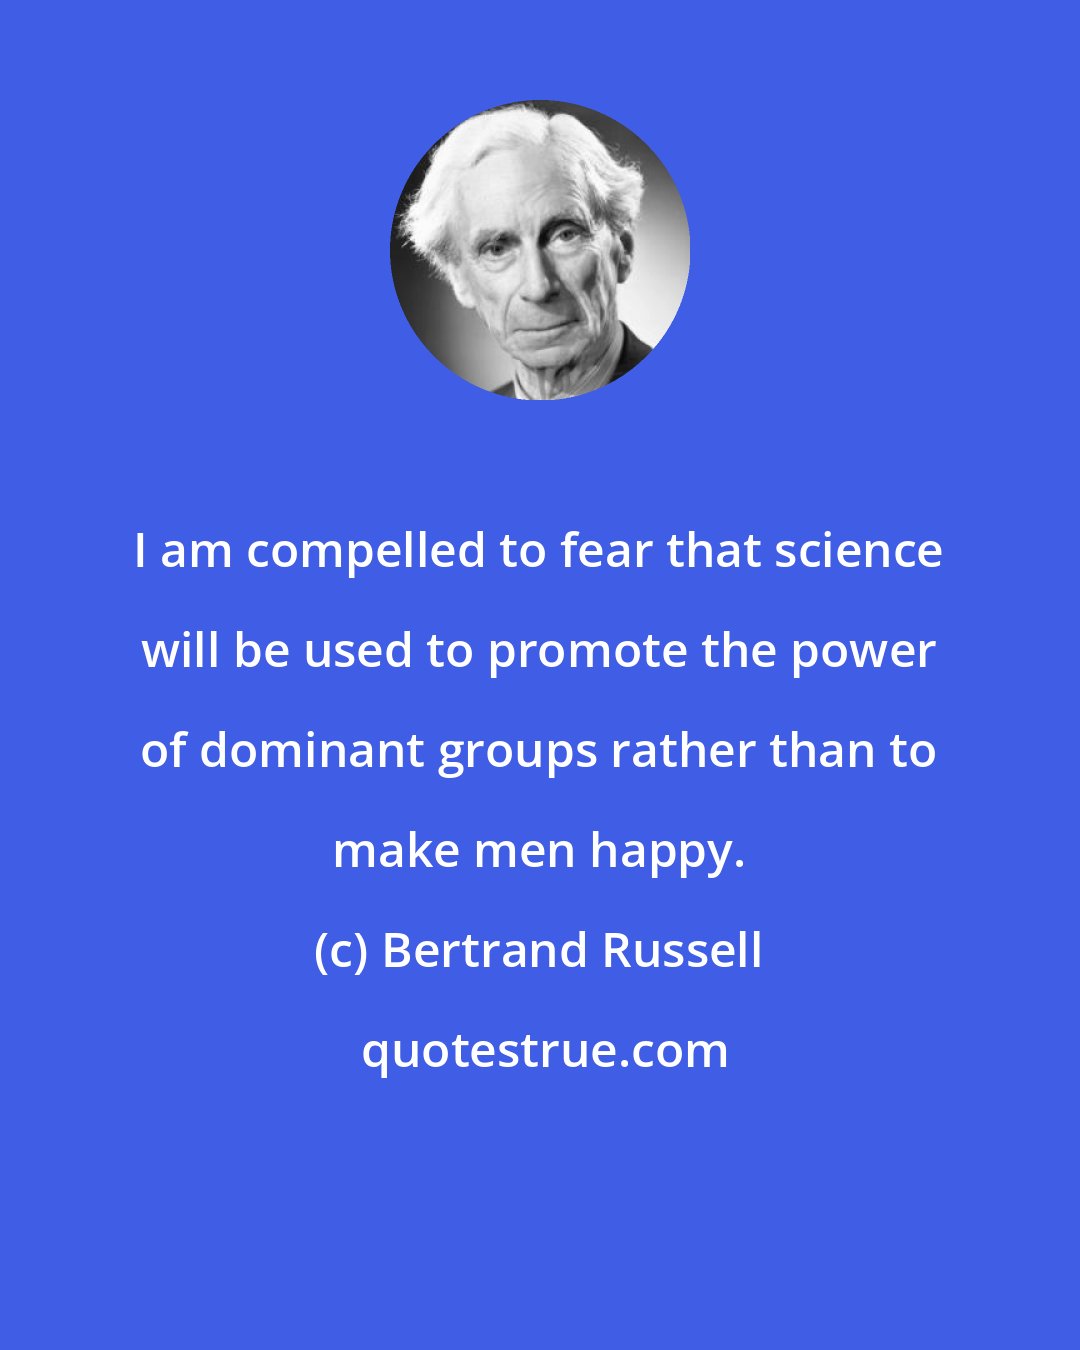 Bertrand Russell: I am compelled to fear that science will be used to promote the power of dominant groups rather than to make men happy.